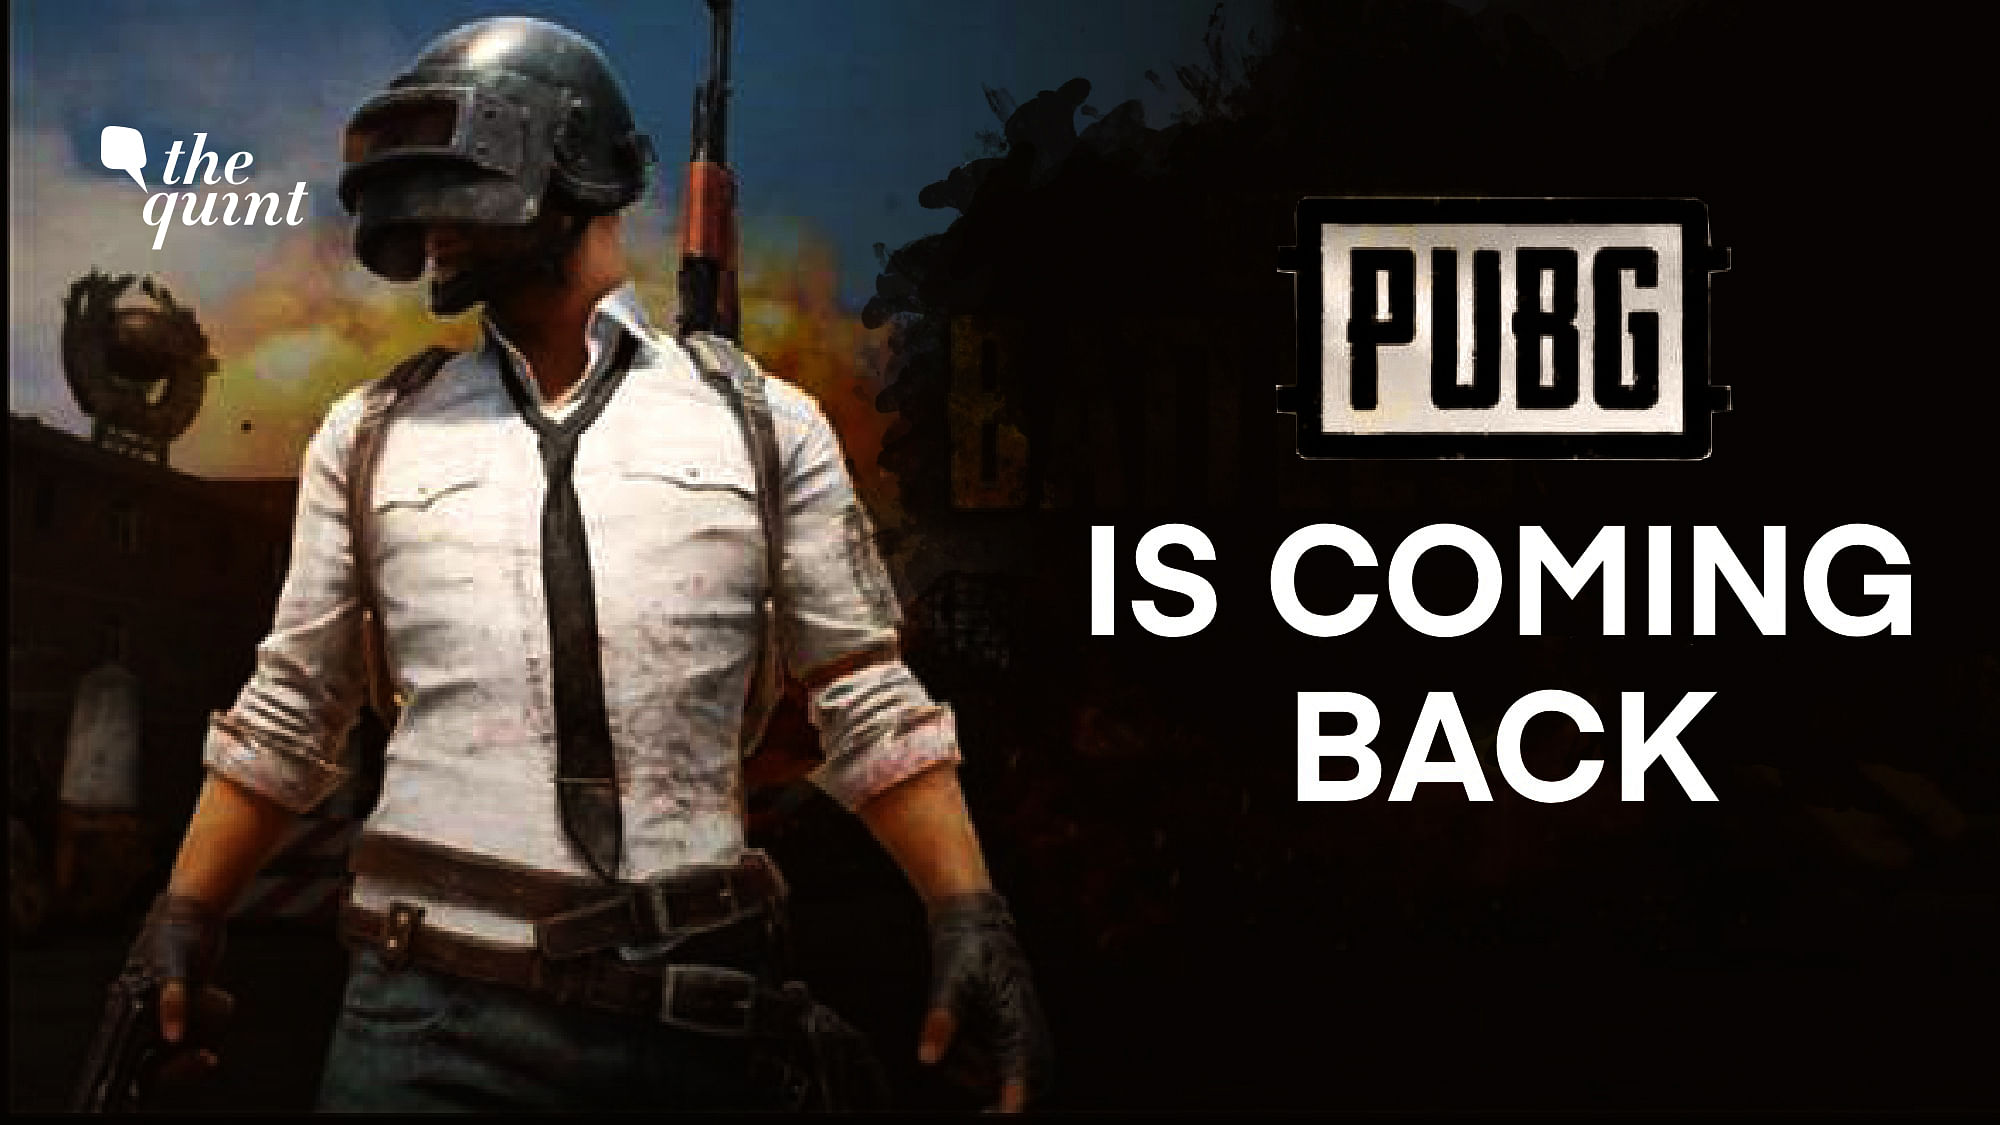 PUBG mobile will only be back in India after it receives approval from the Indian government.